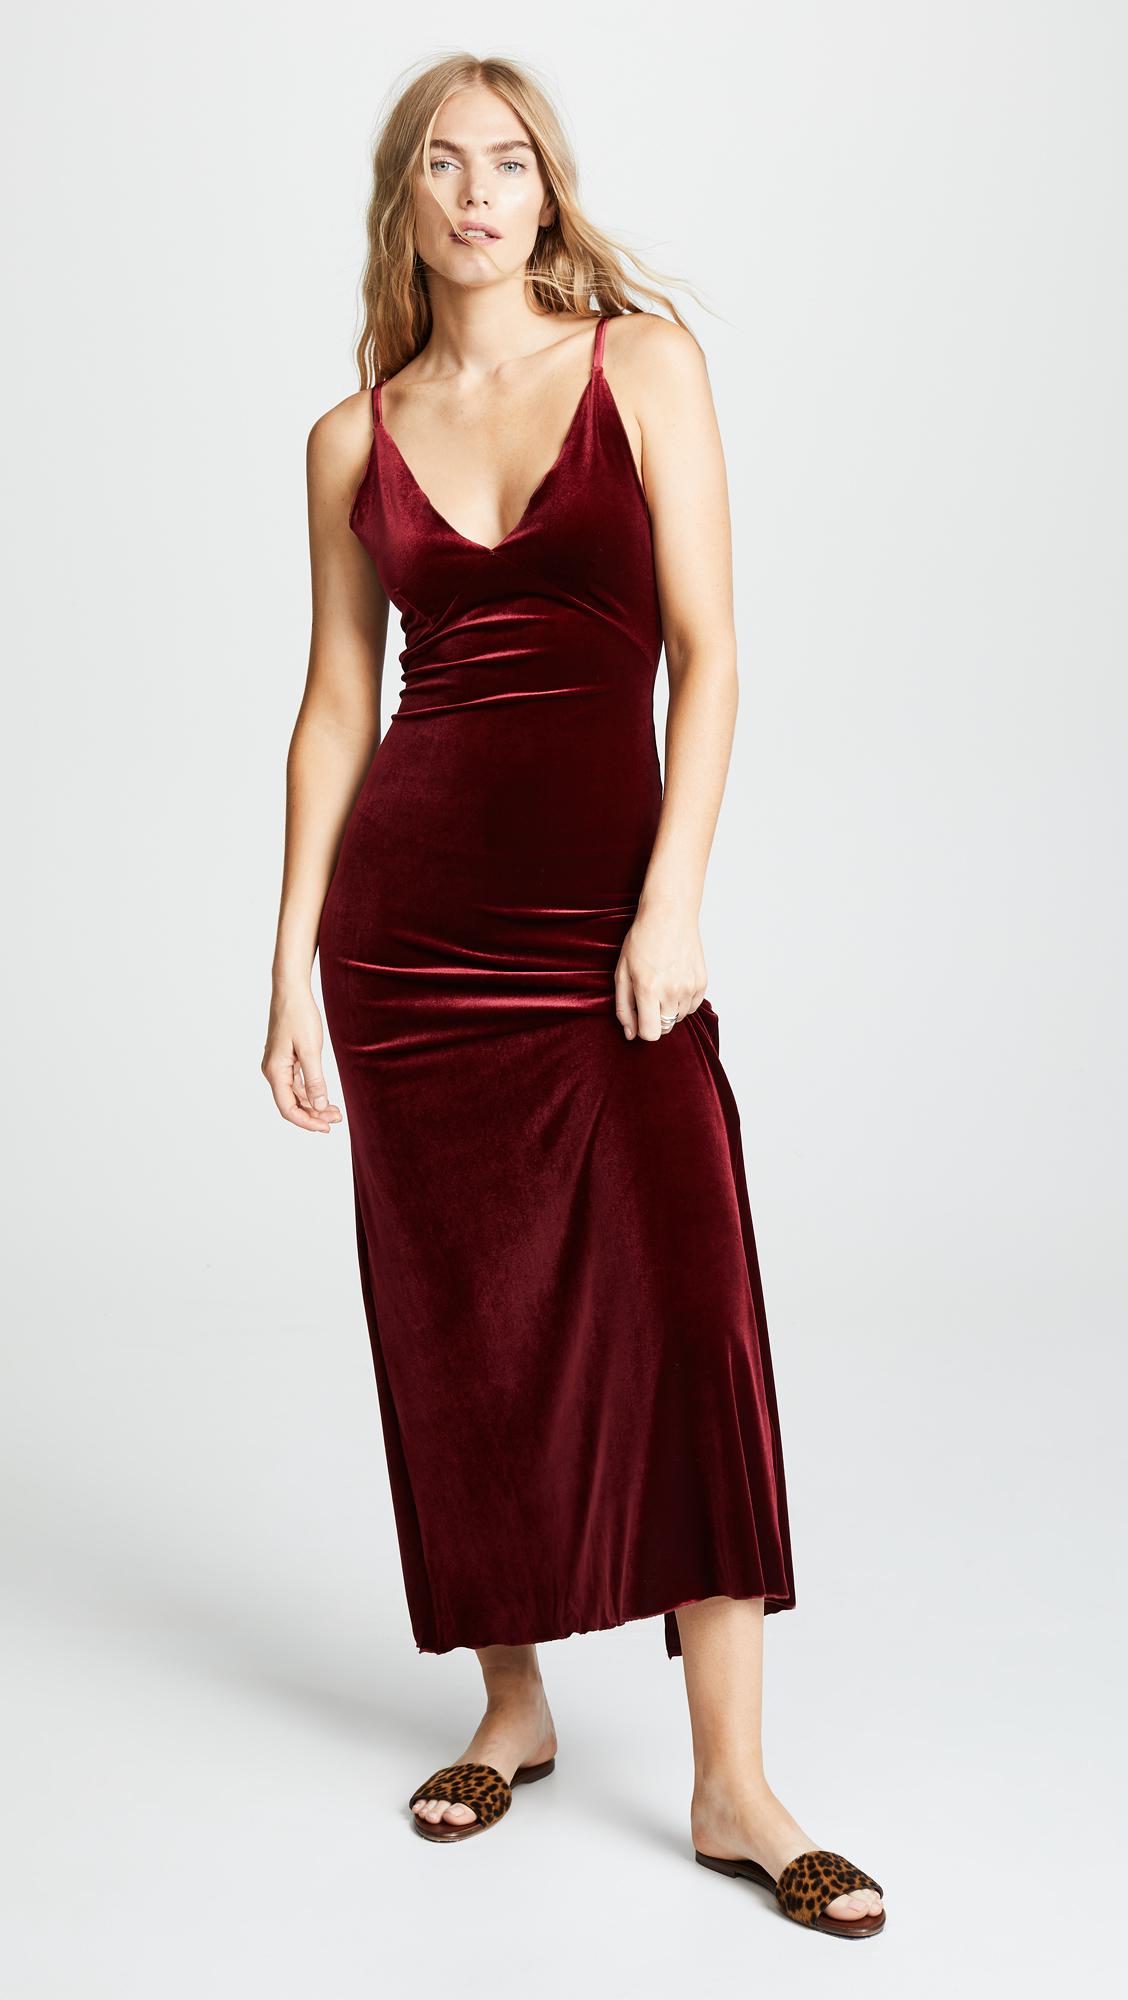  Only  Hearts Synthetic Velour Slip Dress  in Red Lyst